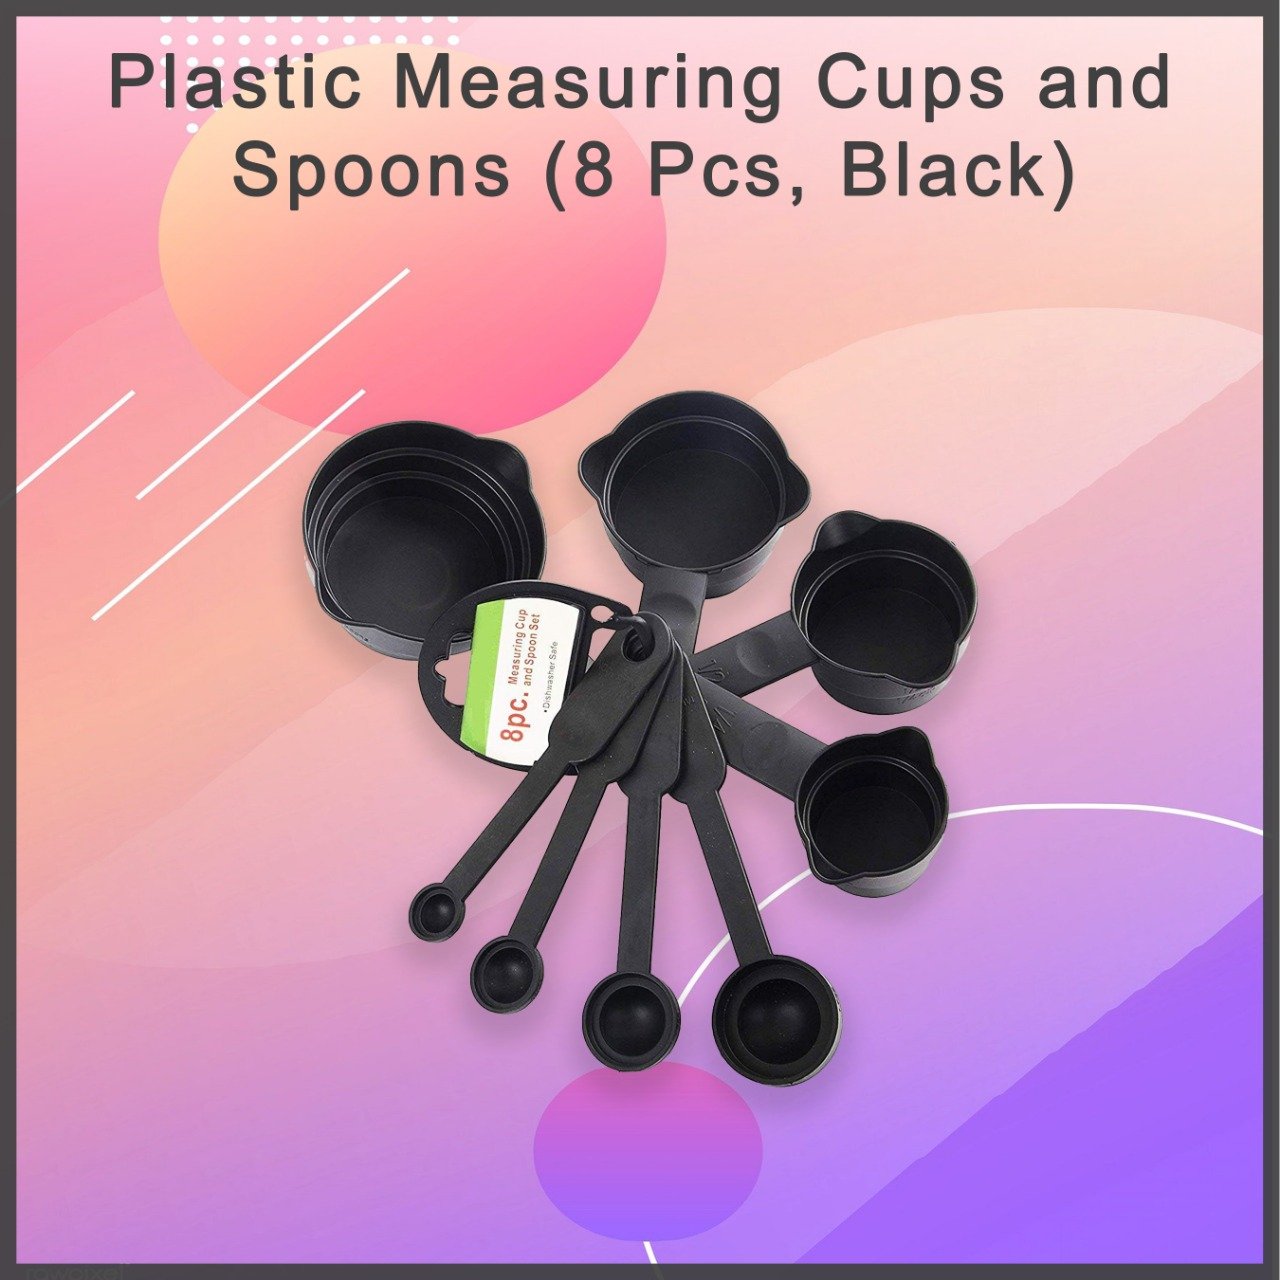 0106 Plastic Measuring Cups and Spoons (8 Pcs, Black) - SkyShopy